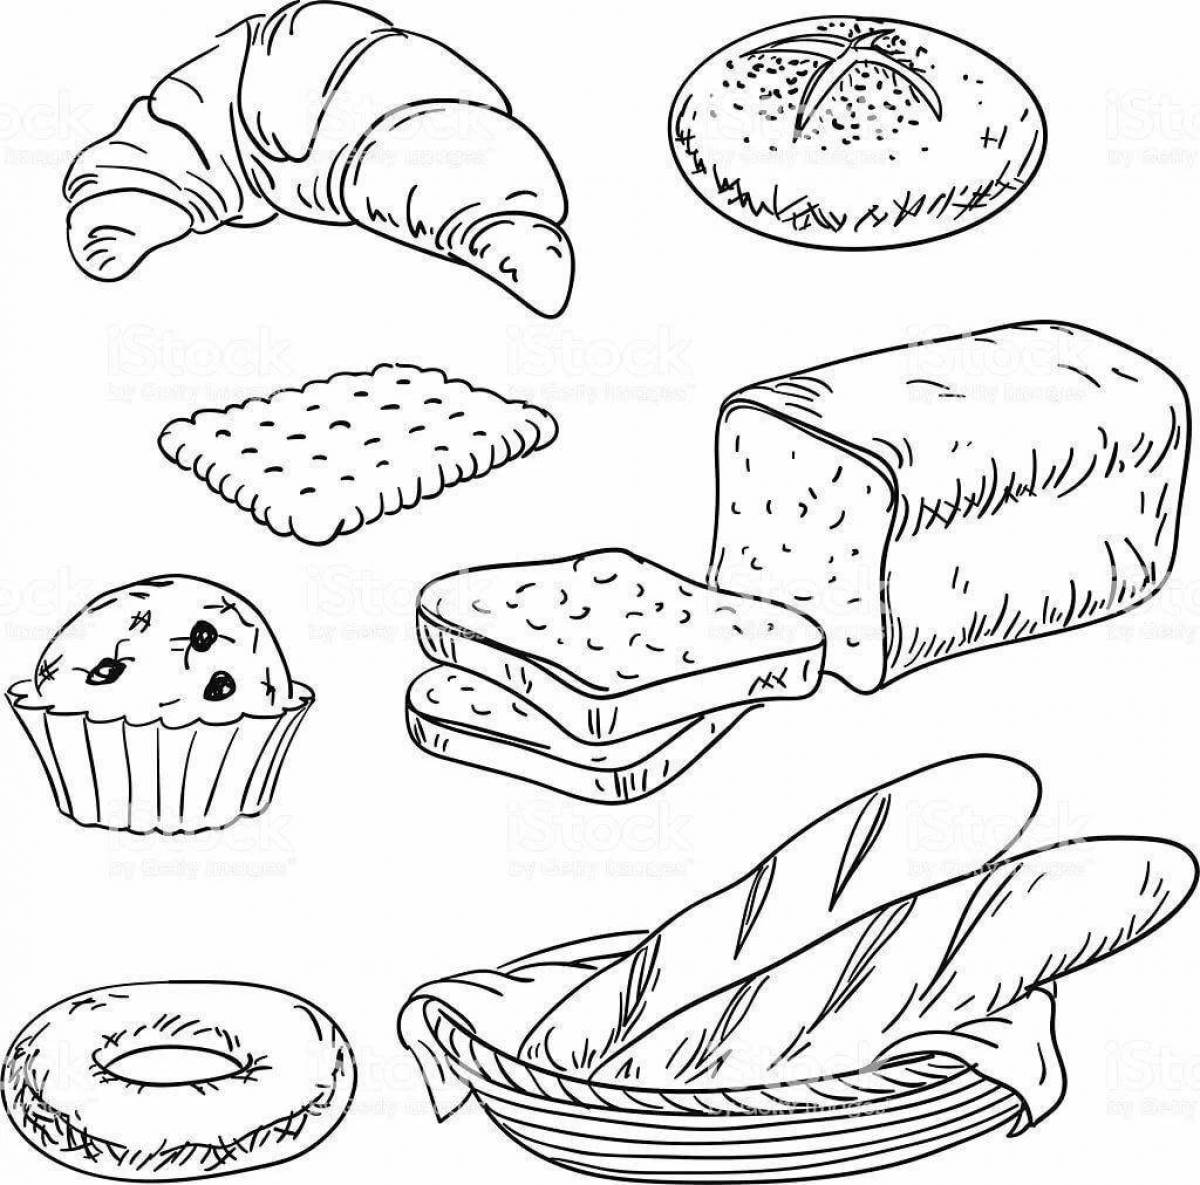 Great pastries coloring pages for kids